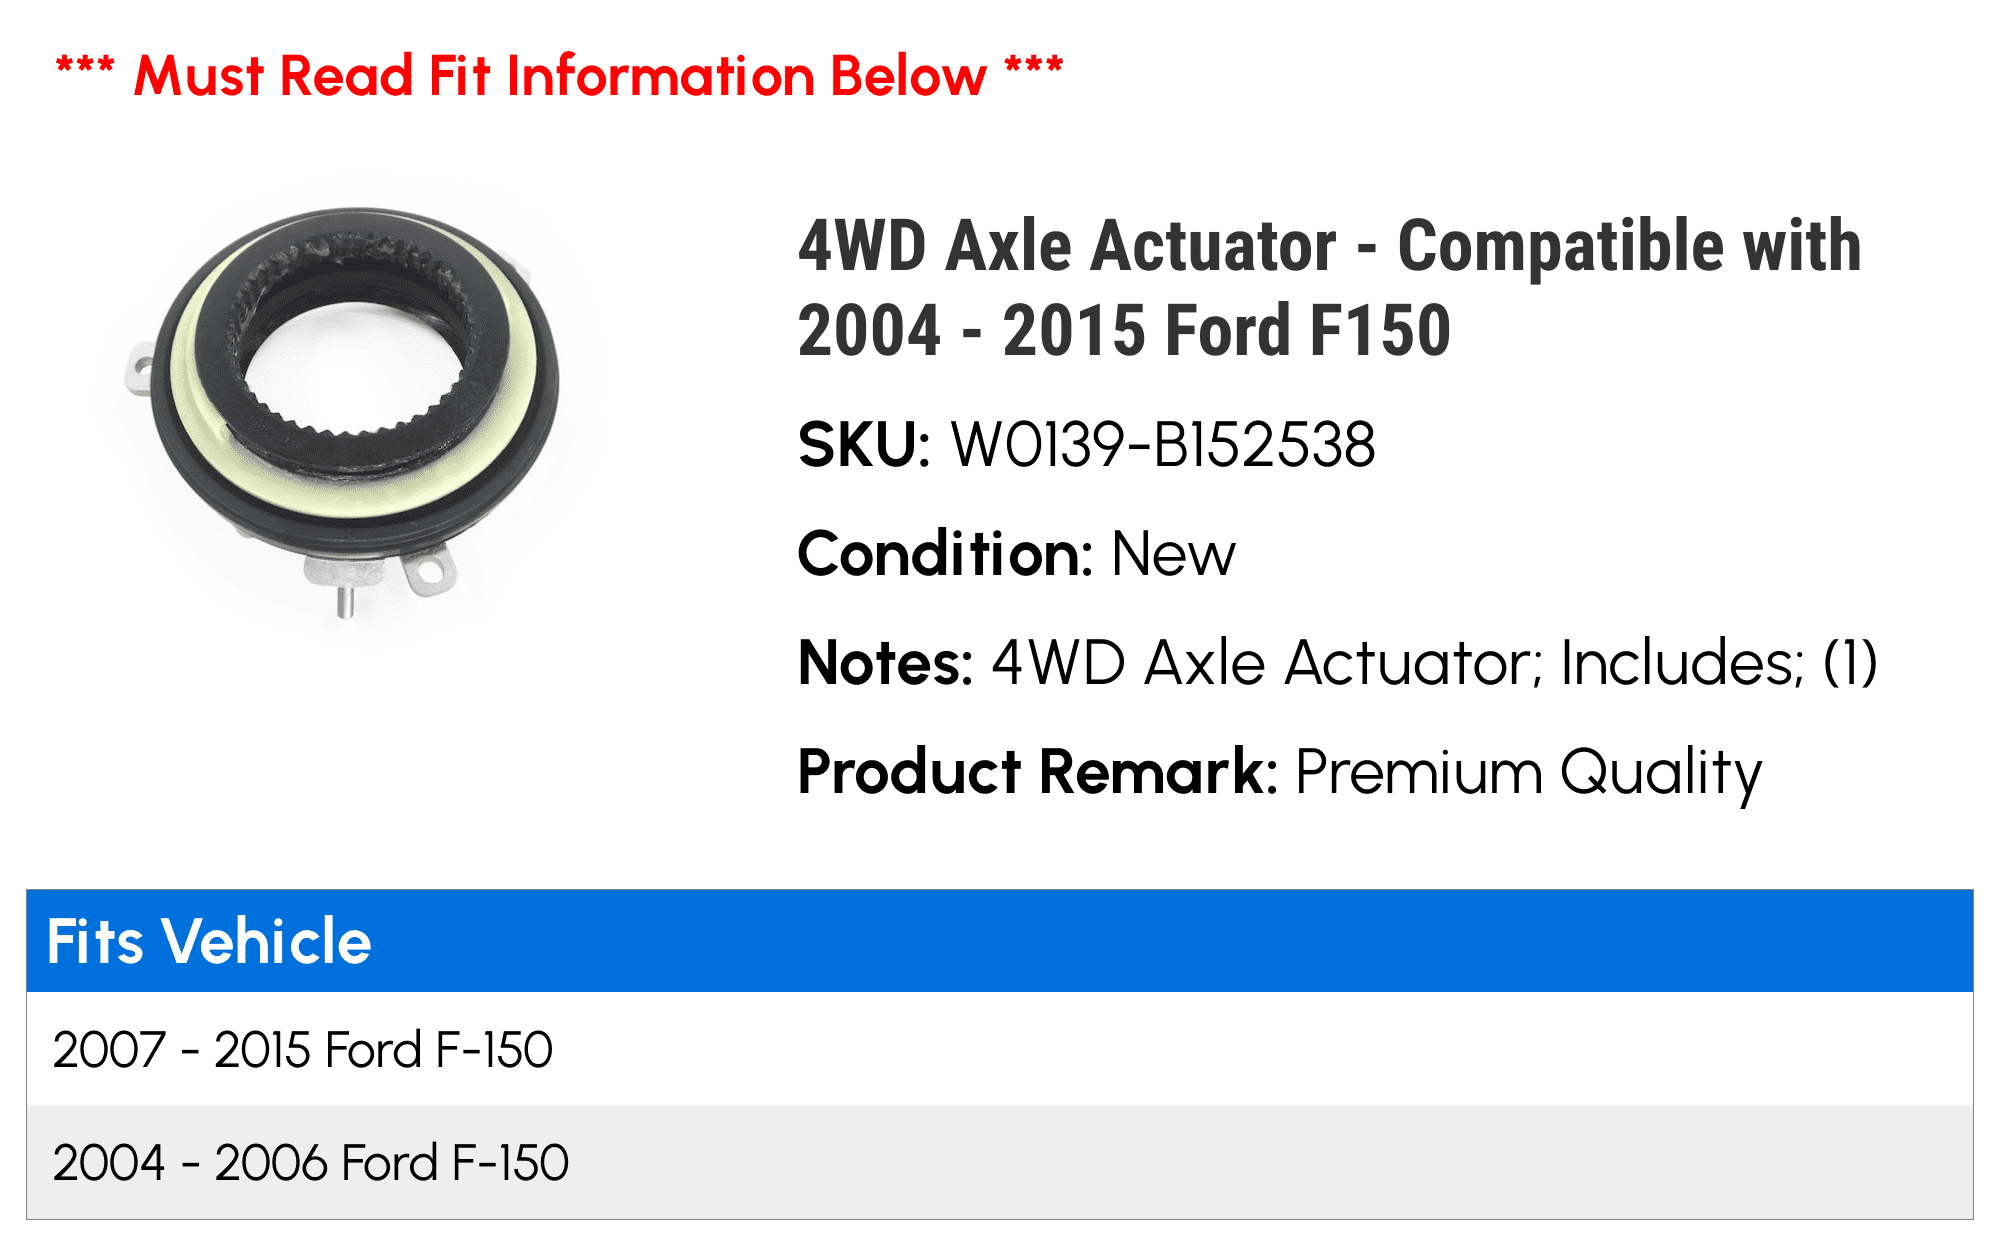 Compatible with 2004-2015 Ford F150 4WD Axle Actuator 